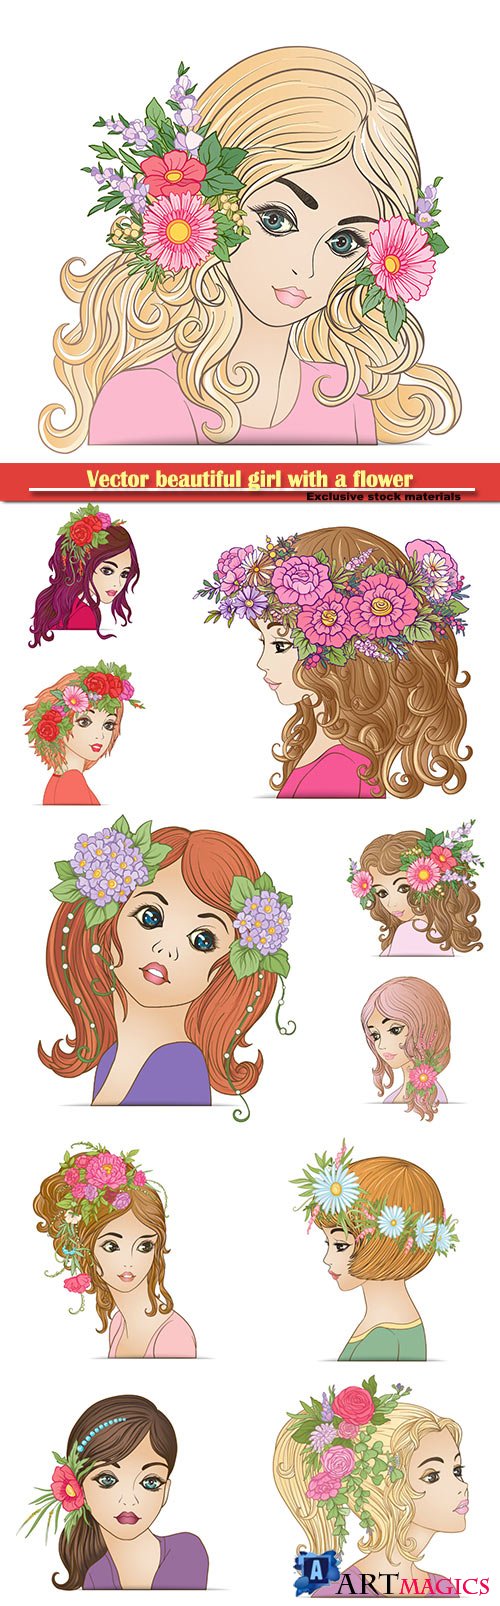 Vector beautiful girl with a flower wreath on his head